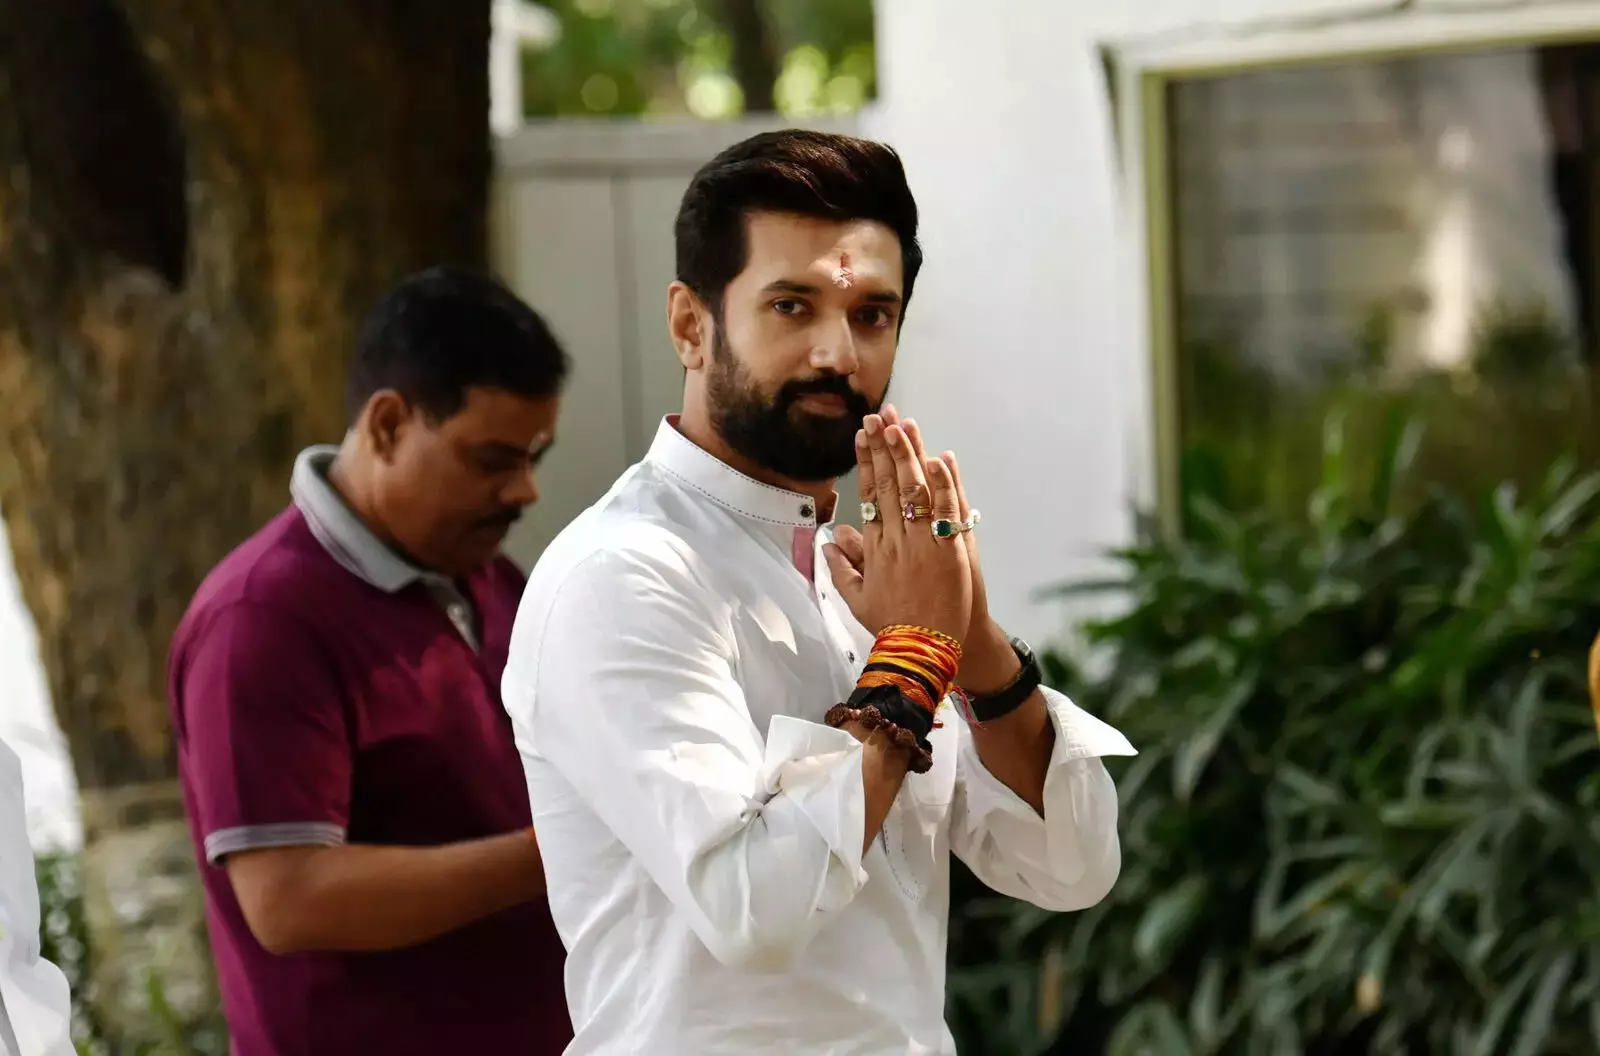 Chirag Paswan will campaign with BJP in Bihar, says Sanjay Jaiswal